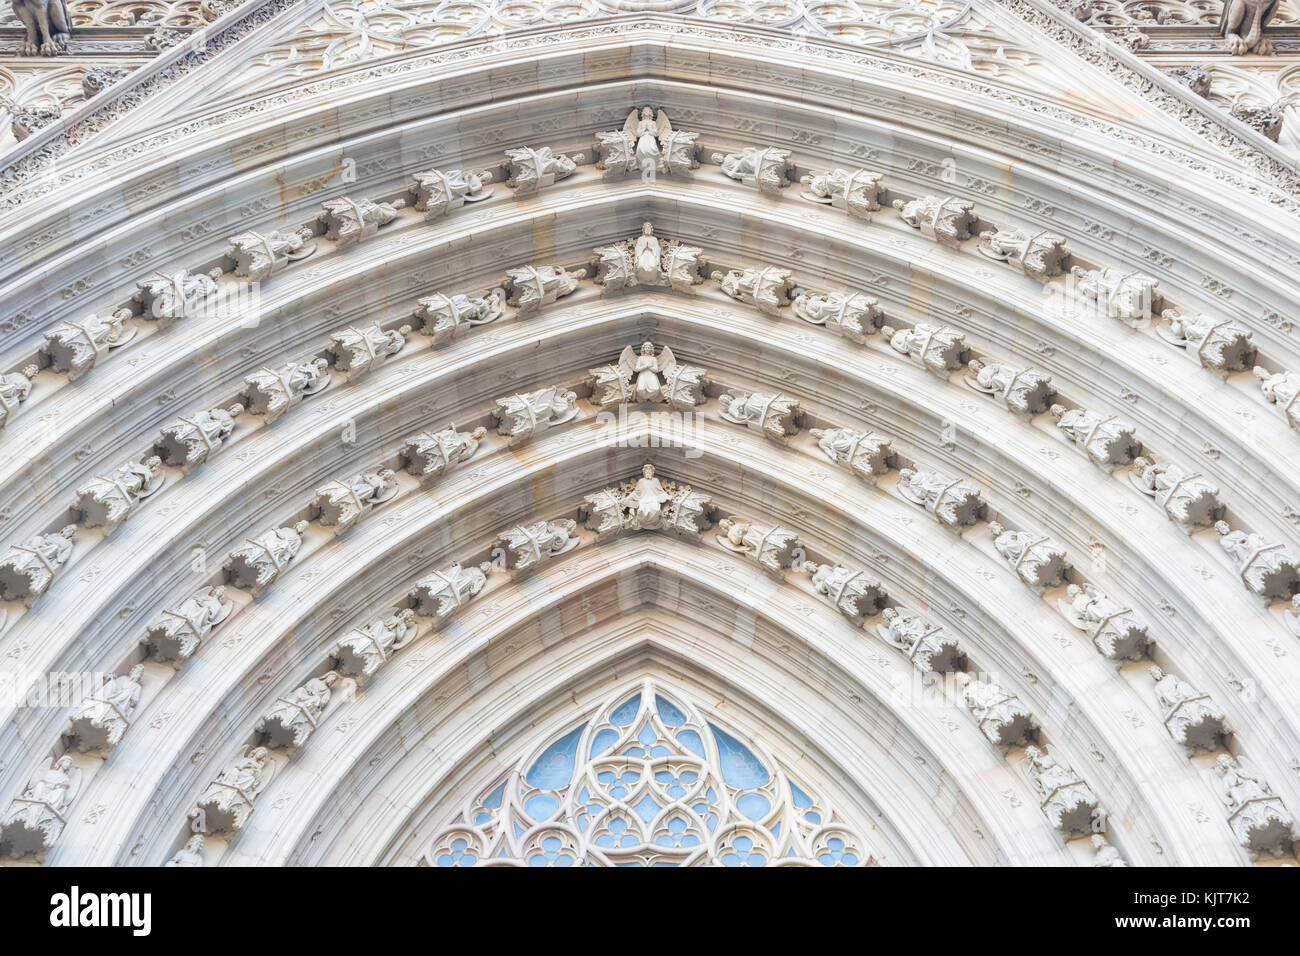 Ornate archivolt at the entrance of the cathedral in Barcelona, Spain Stock Photo